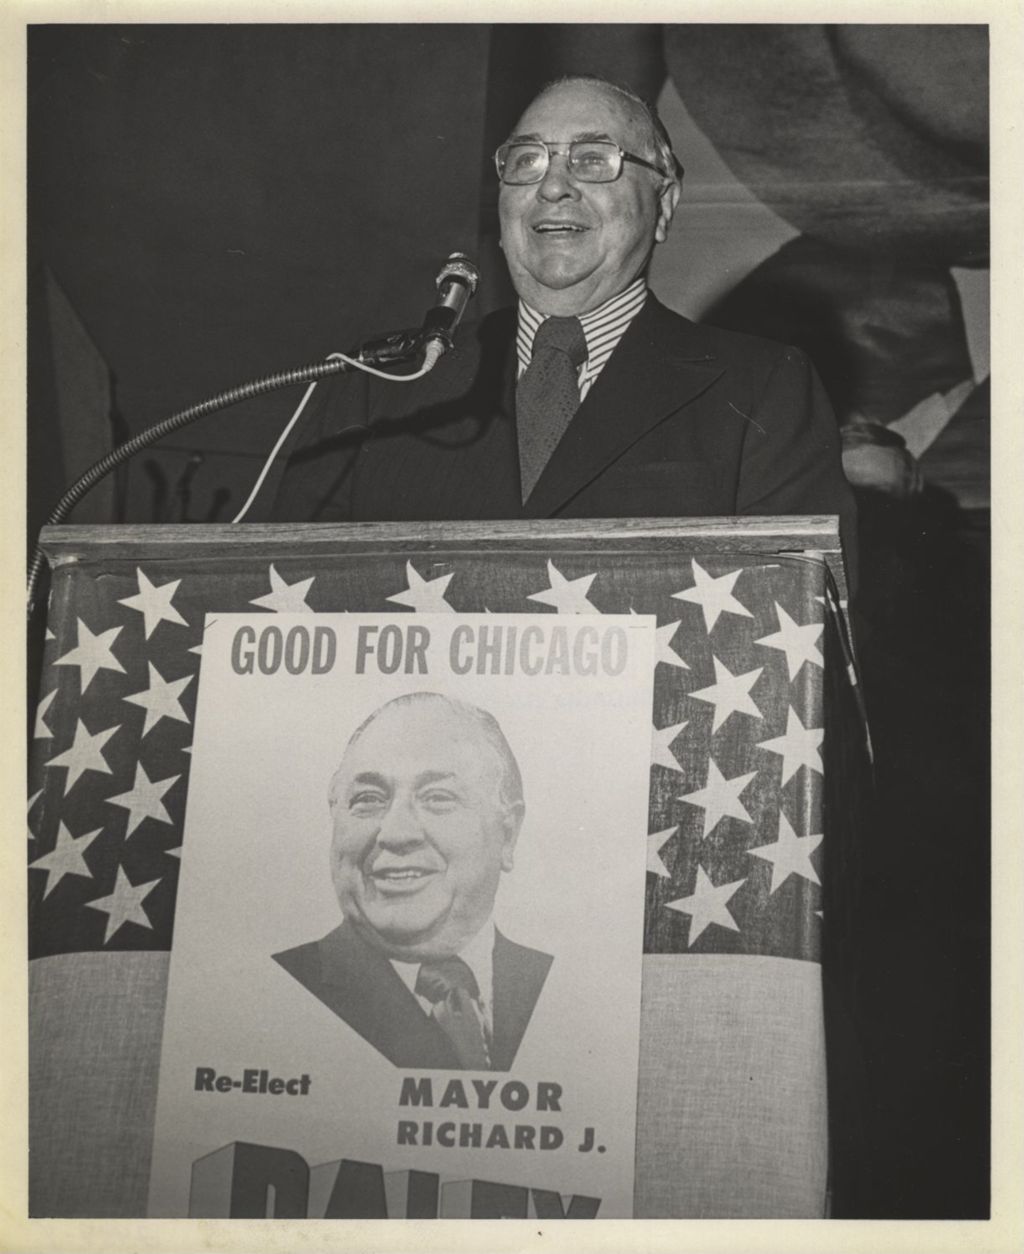 Miniature of Richard J. Daley speaking at re-election rally